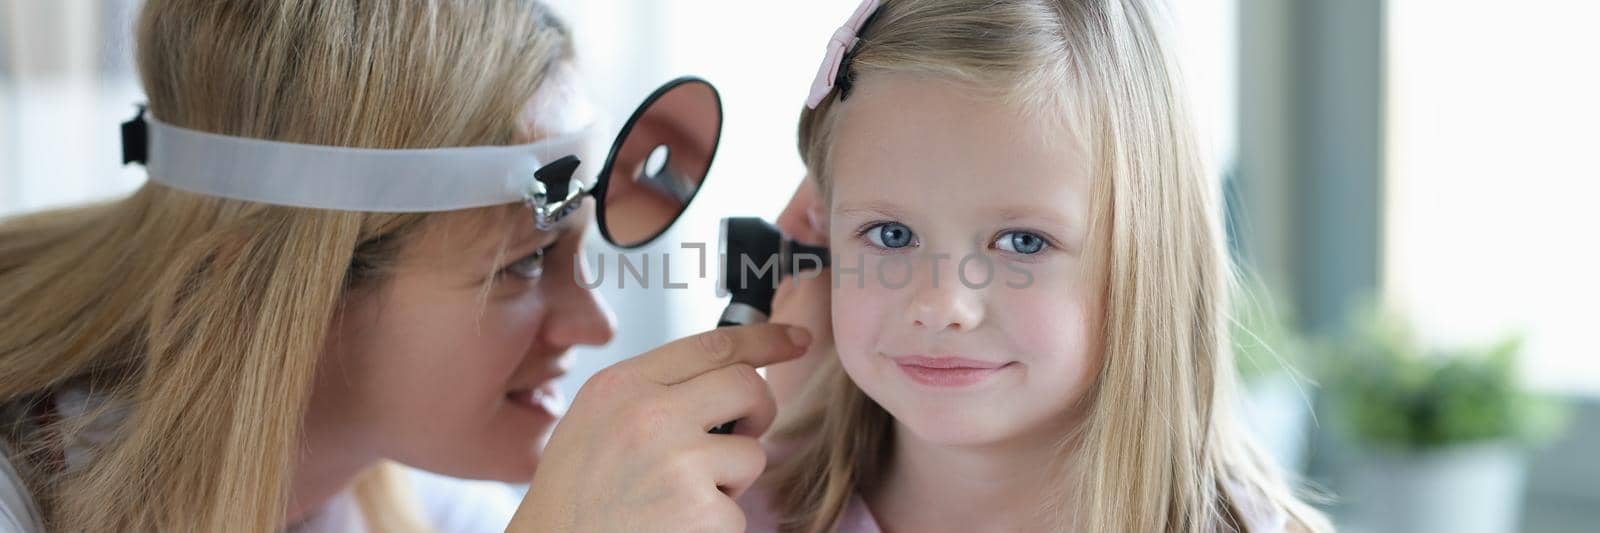 ENT doctor looks at little girl's ears with otoscope closeup by kuprevich